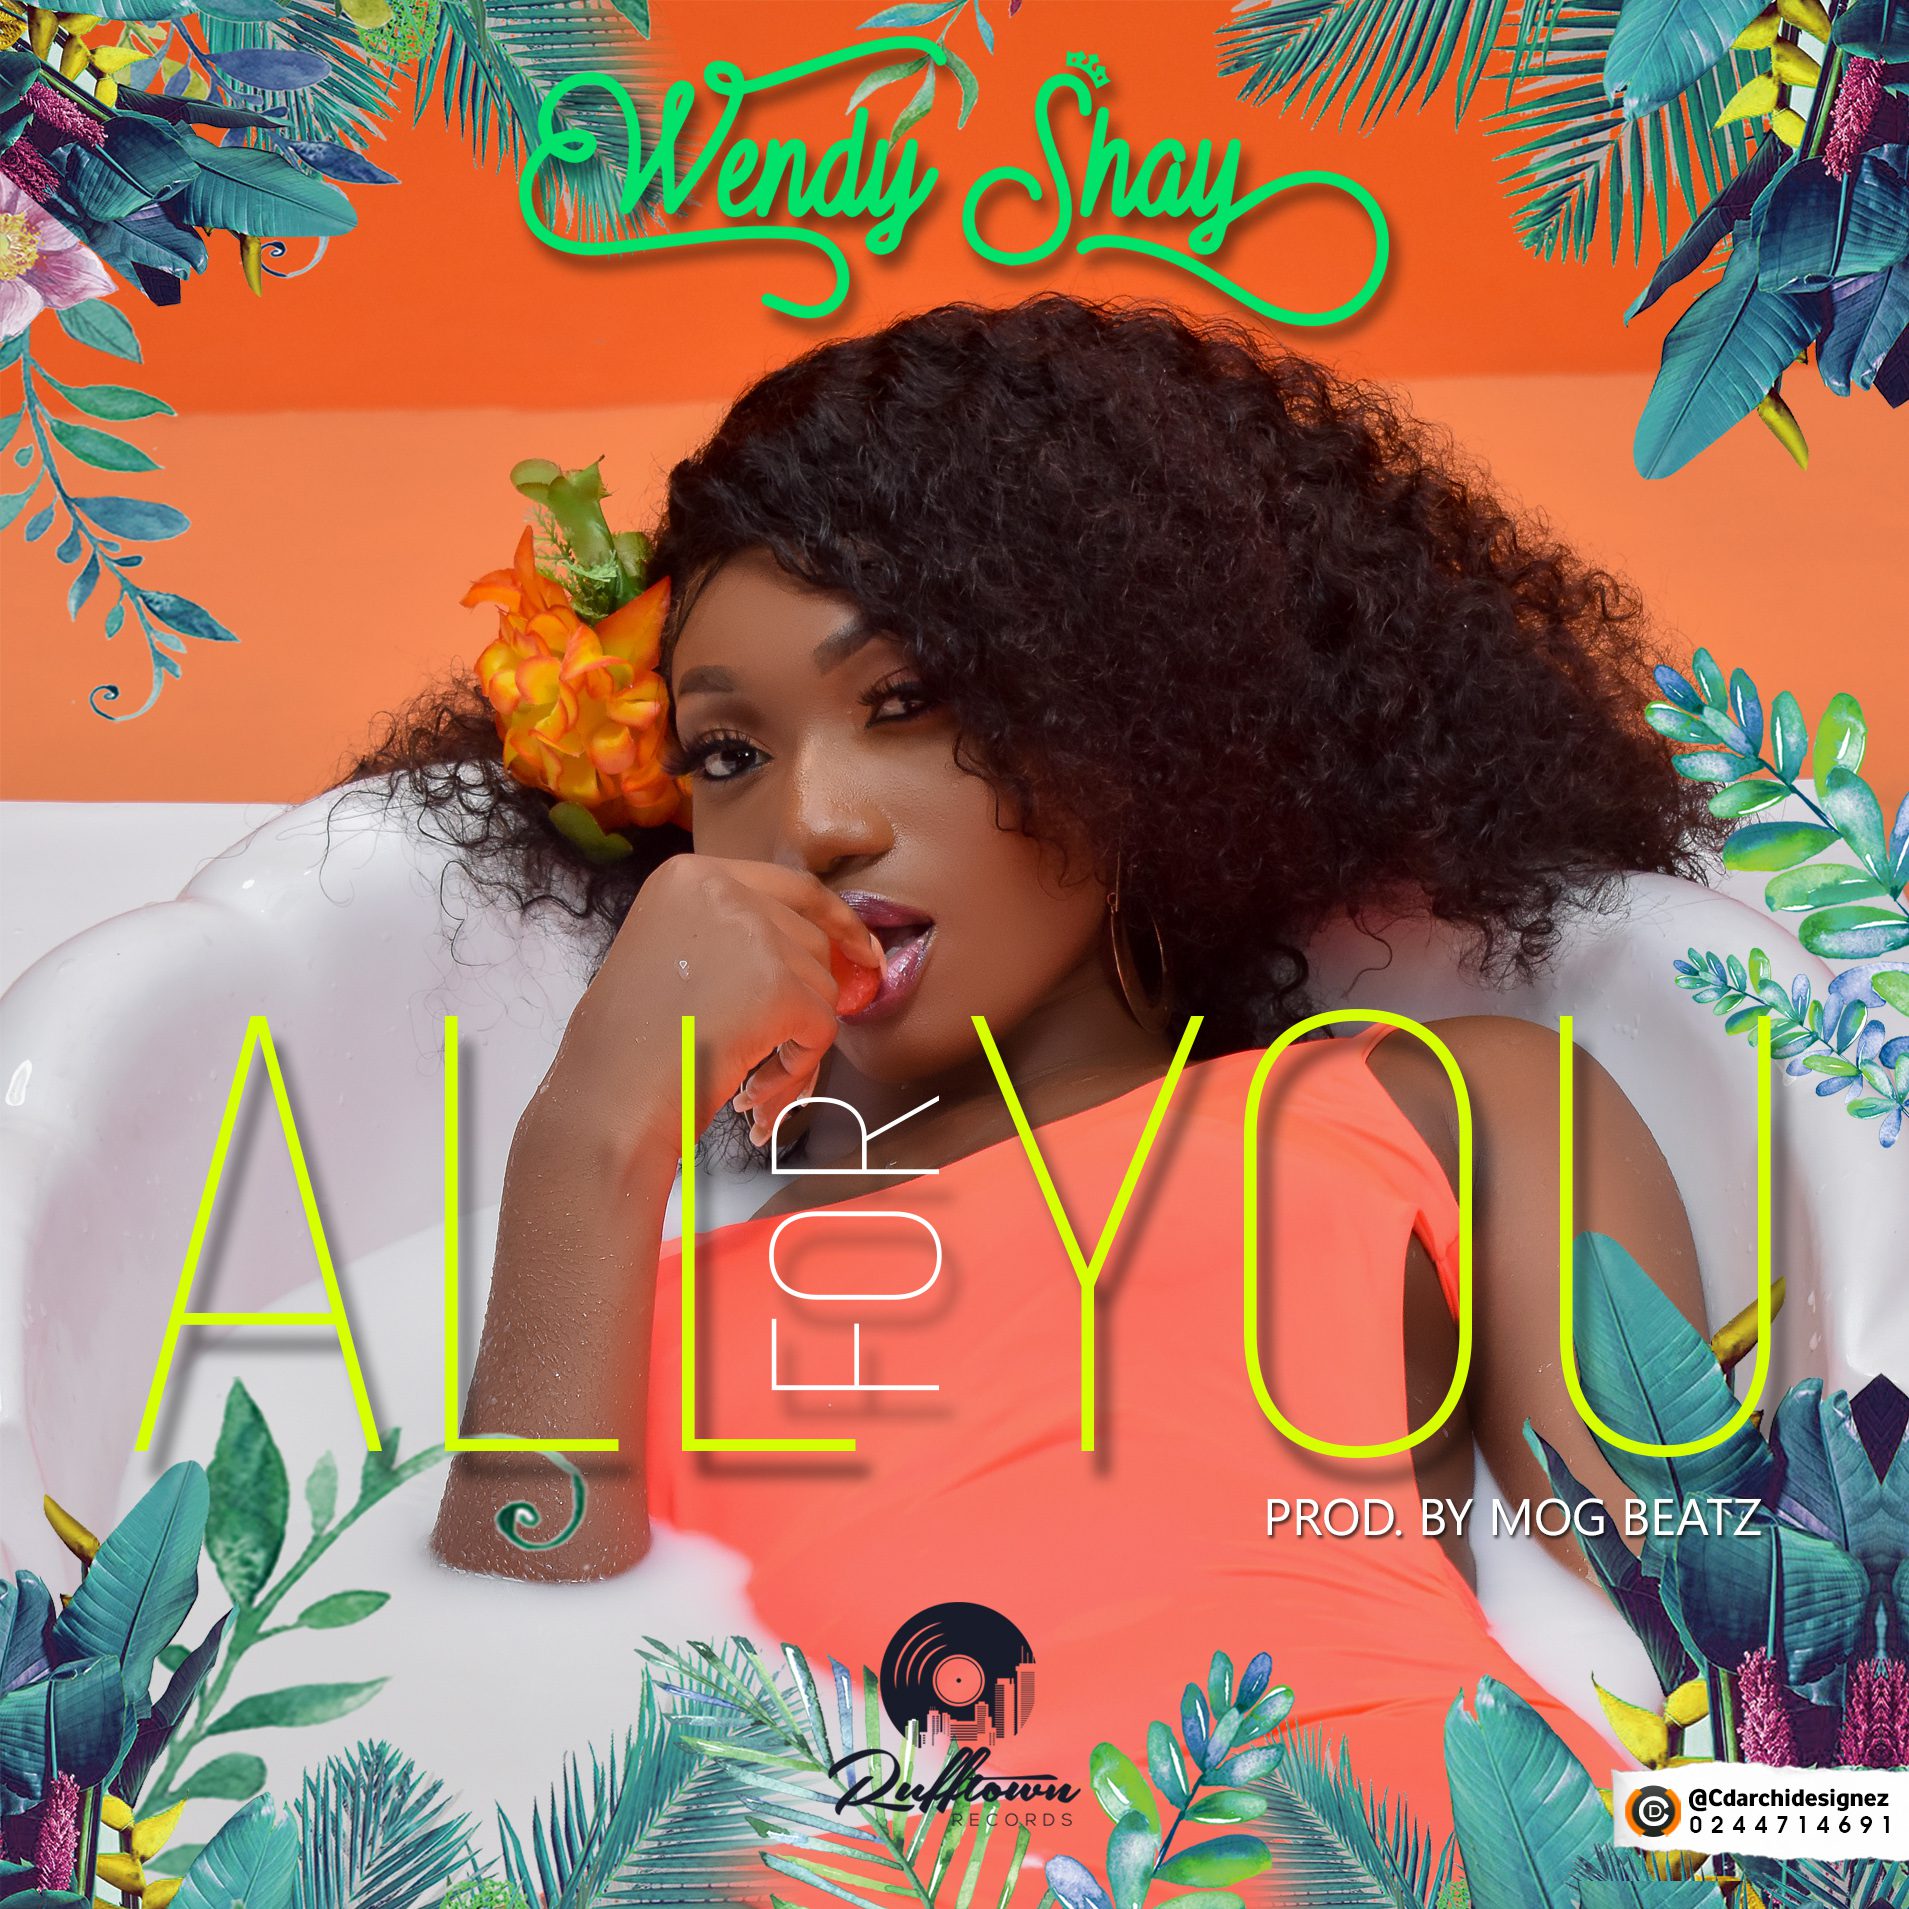 Audio + Video: Wendy Shay – All For You (Prod. By MOG Beatz)